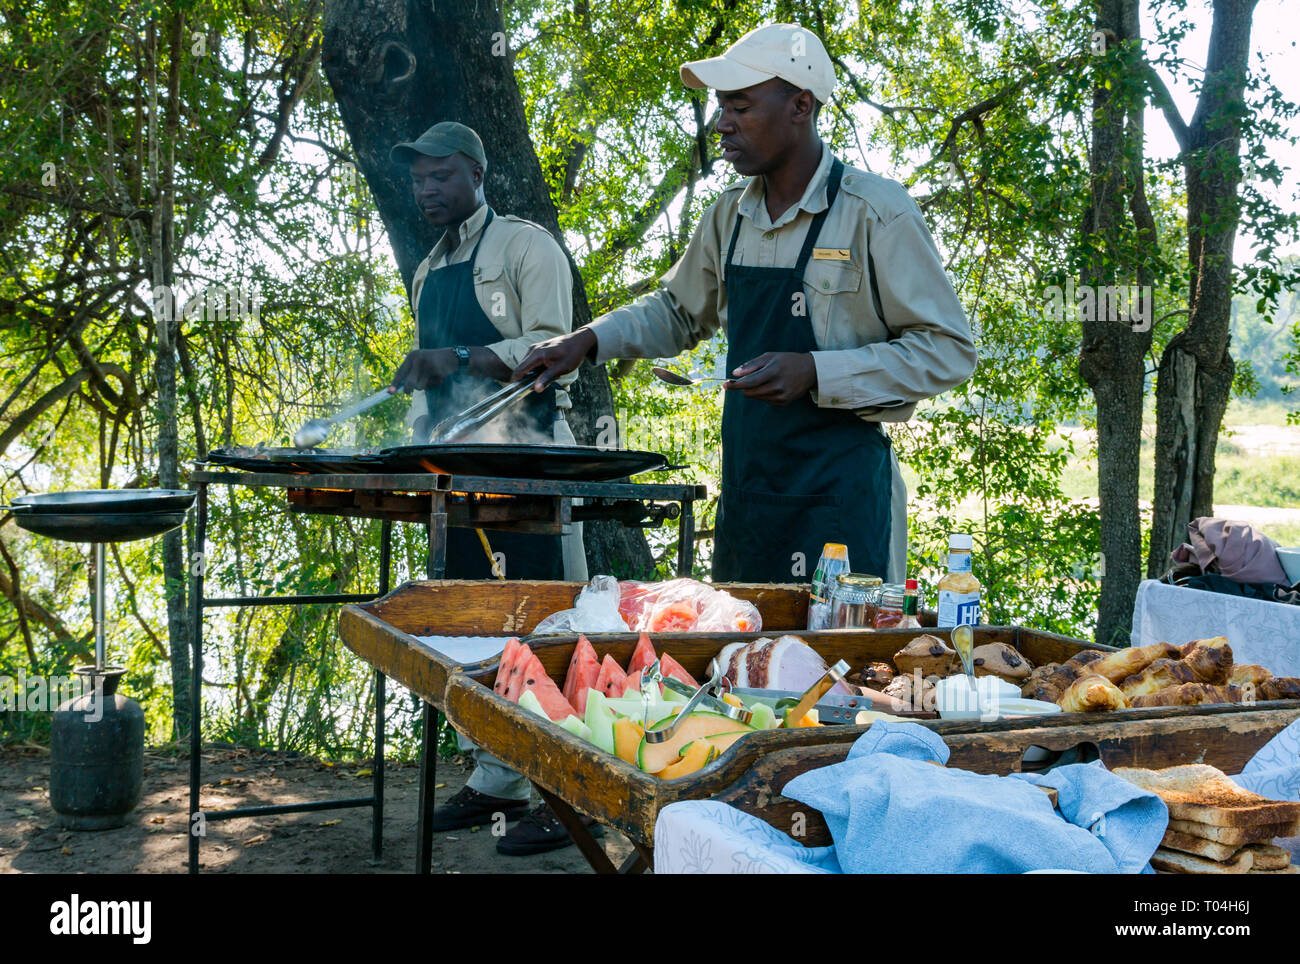 Black staff cooking breakfast on outdoor grill for Safari guests at Sabi Sands game reserve, South Africa Stock Photo